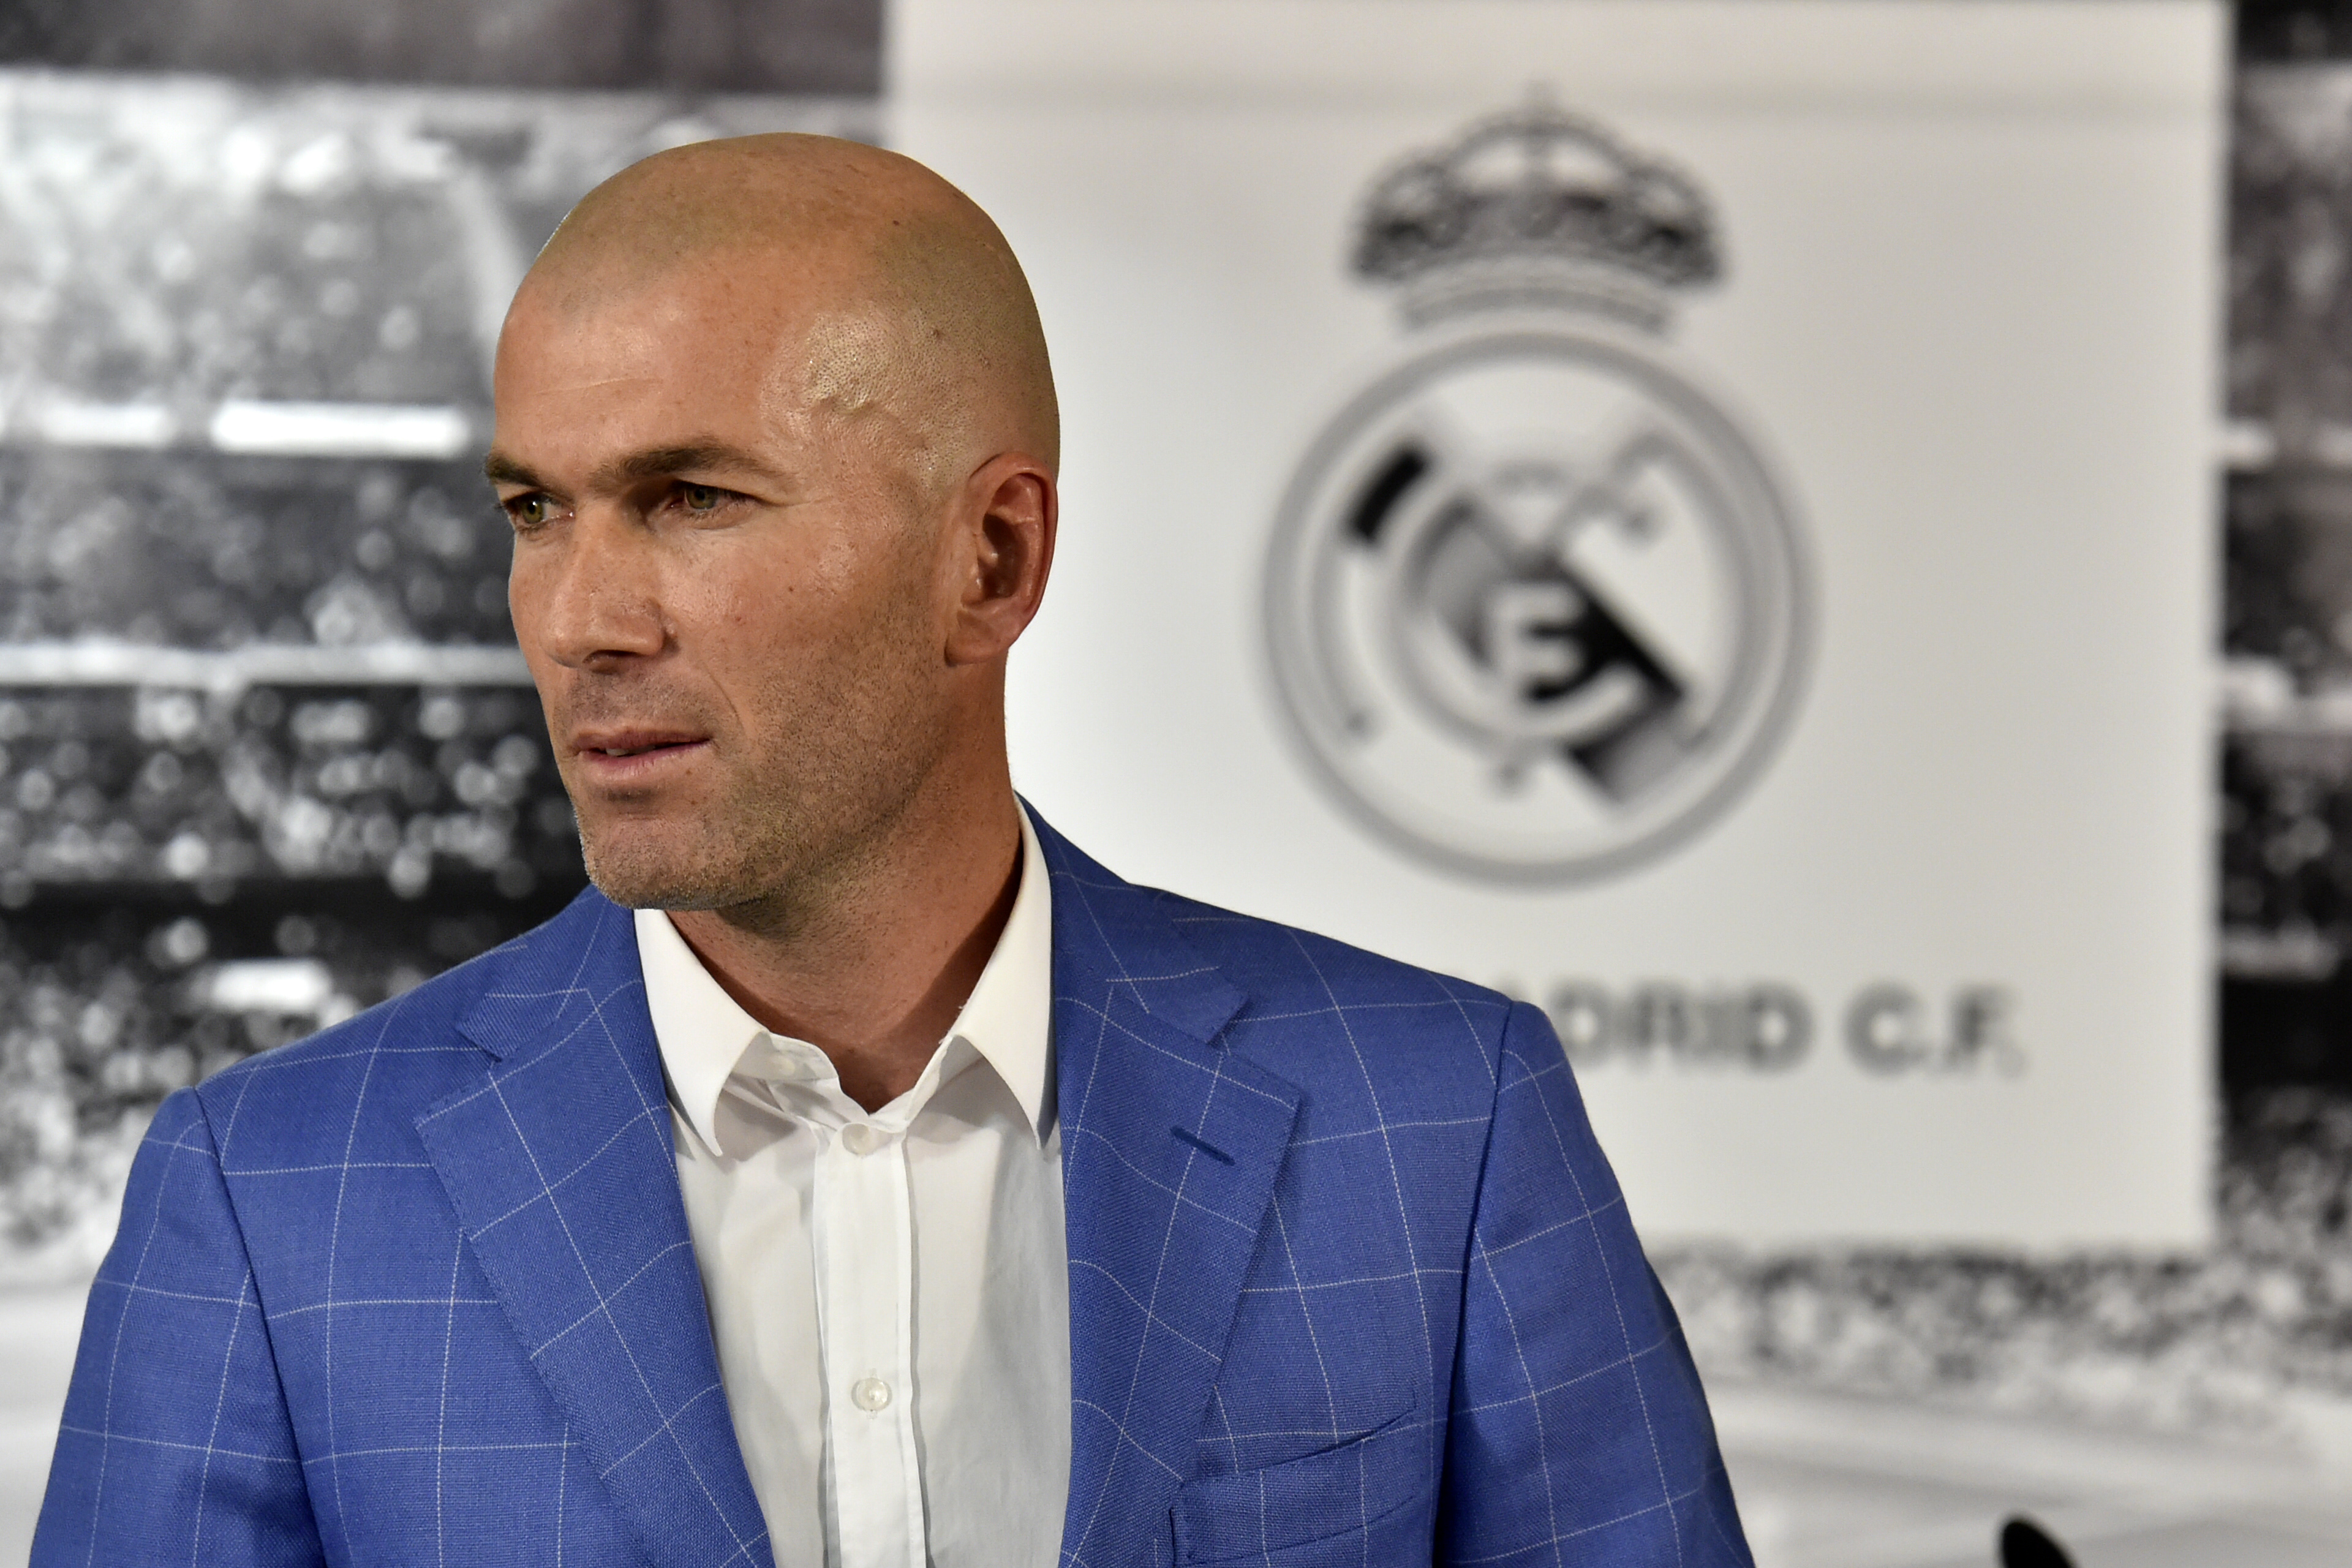 Real Madrid's new French coach Zinedine Zidane poses after a statement of Real Madrid's president at the Santiago Bernabeu stadium in Madrid on January 4, 2016. Rafael Benitez's unhappy reign in charge of Real Madrid came to an end after just seven months and 25 games when he was sacked and replaced by club legend Zinedine Zidane today.   AFP PHOTO/ GERARD JULIEN / AFP / GERARD JULIEN        (Photo credit should read GERARD JULIEN/AFP/Getty Images)